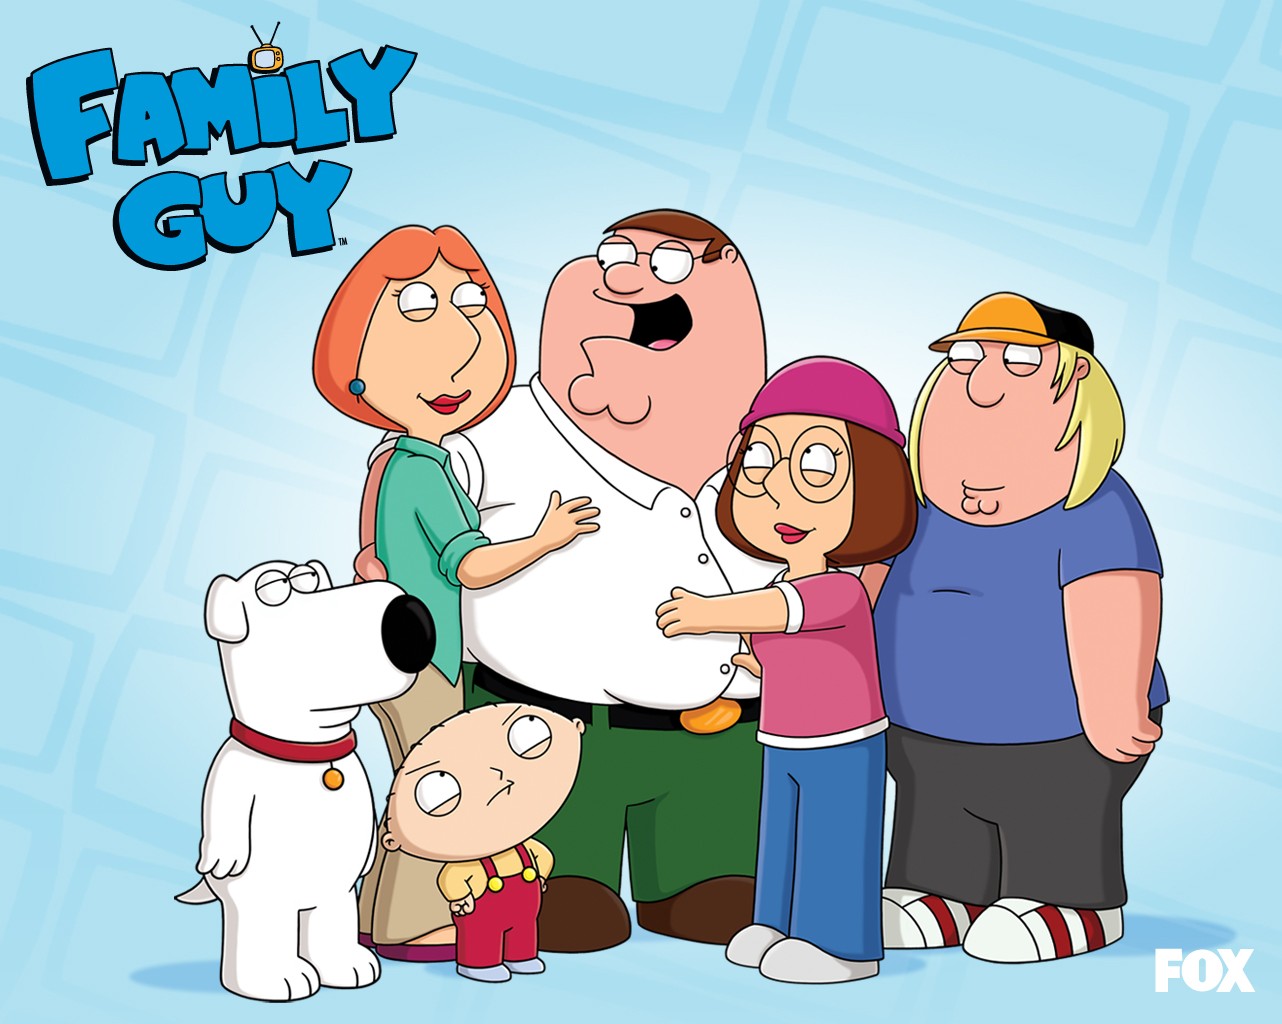 peter griffin, tv show, family guy, brian griffin, chris griffin, lois griffin, meg griffin, stewie griffin